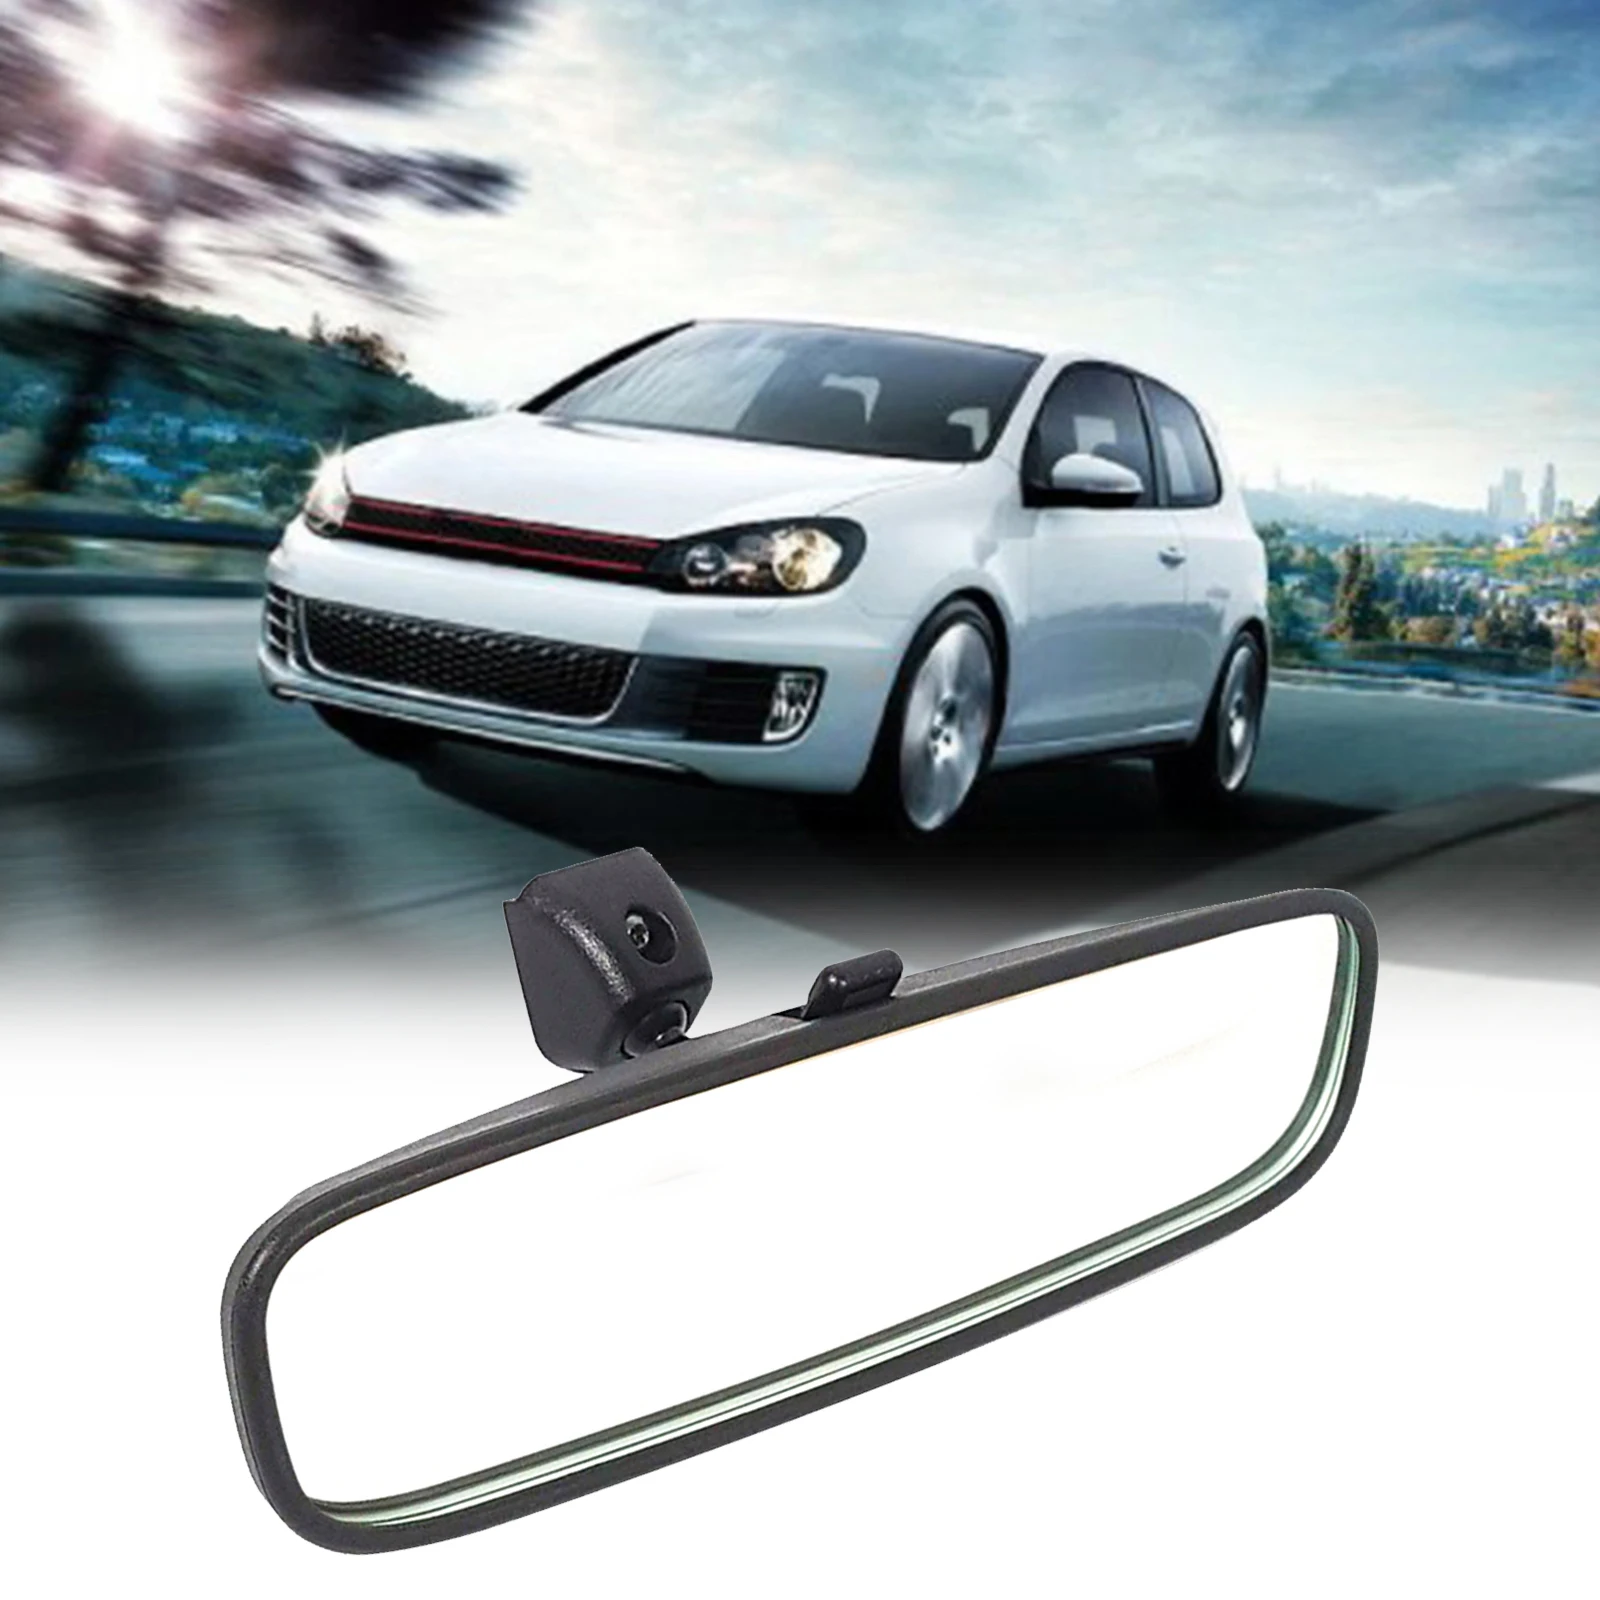 Rear View Mirror 85101-3x100 85101 3x100 for SE Accent GLS